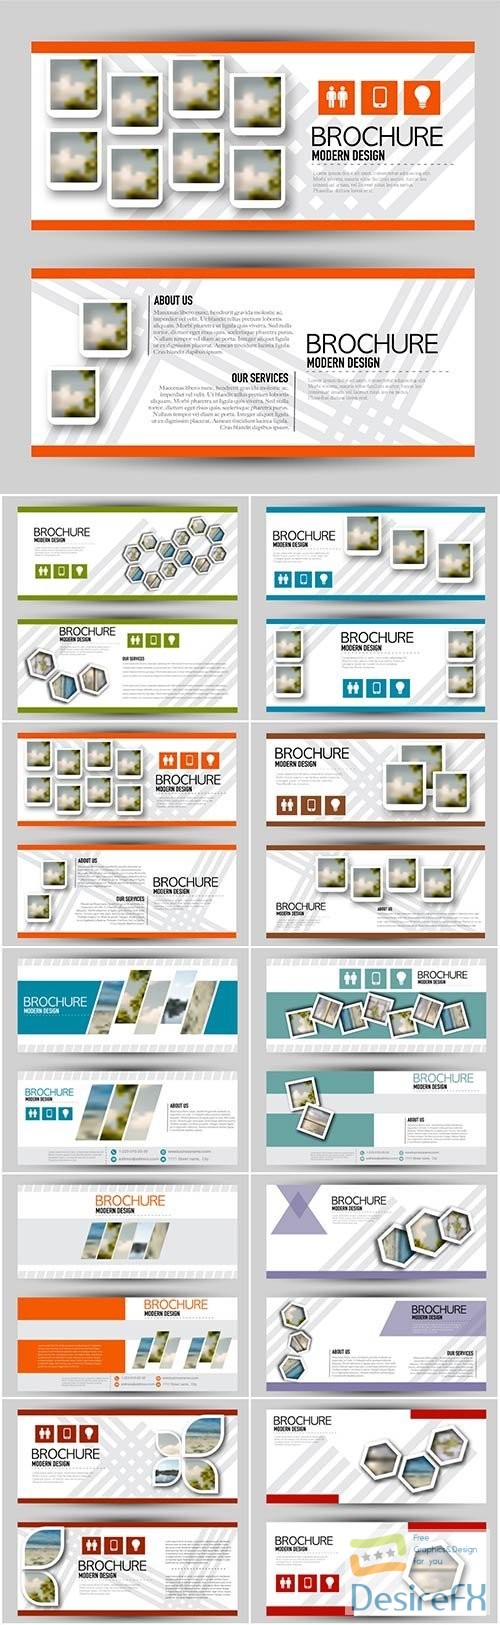 Set of banners for web and advertisement print out, vector horizontal flyer handout design # 2